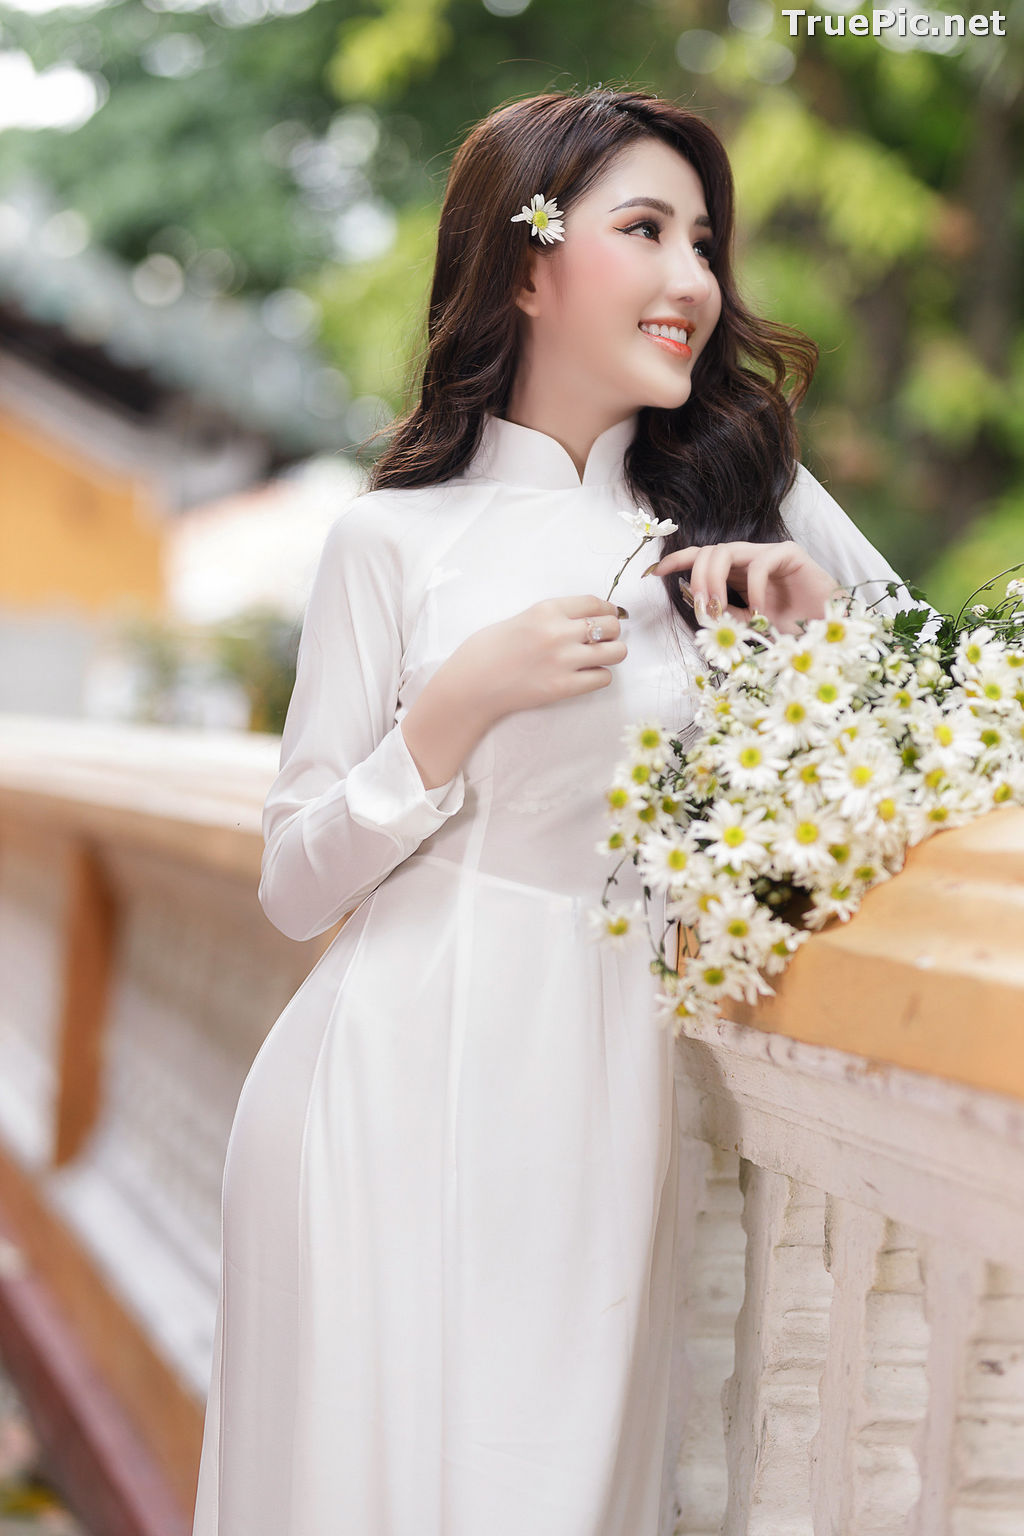 Image The Beauty of Vietnamese Girls with Traditional Dress (Ao Dai) #1 - TruePic.net - Picture-17